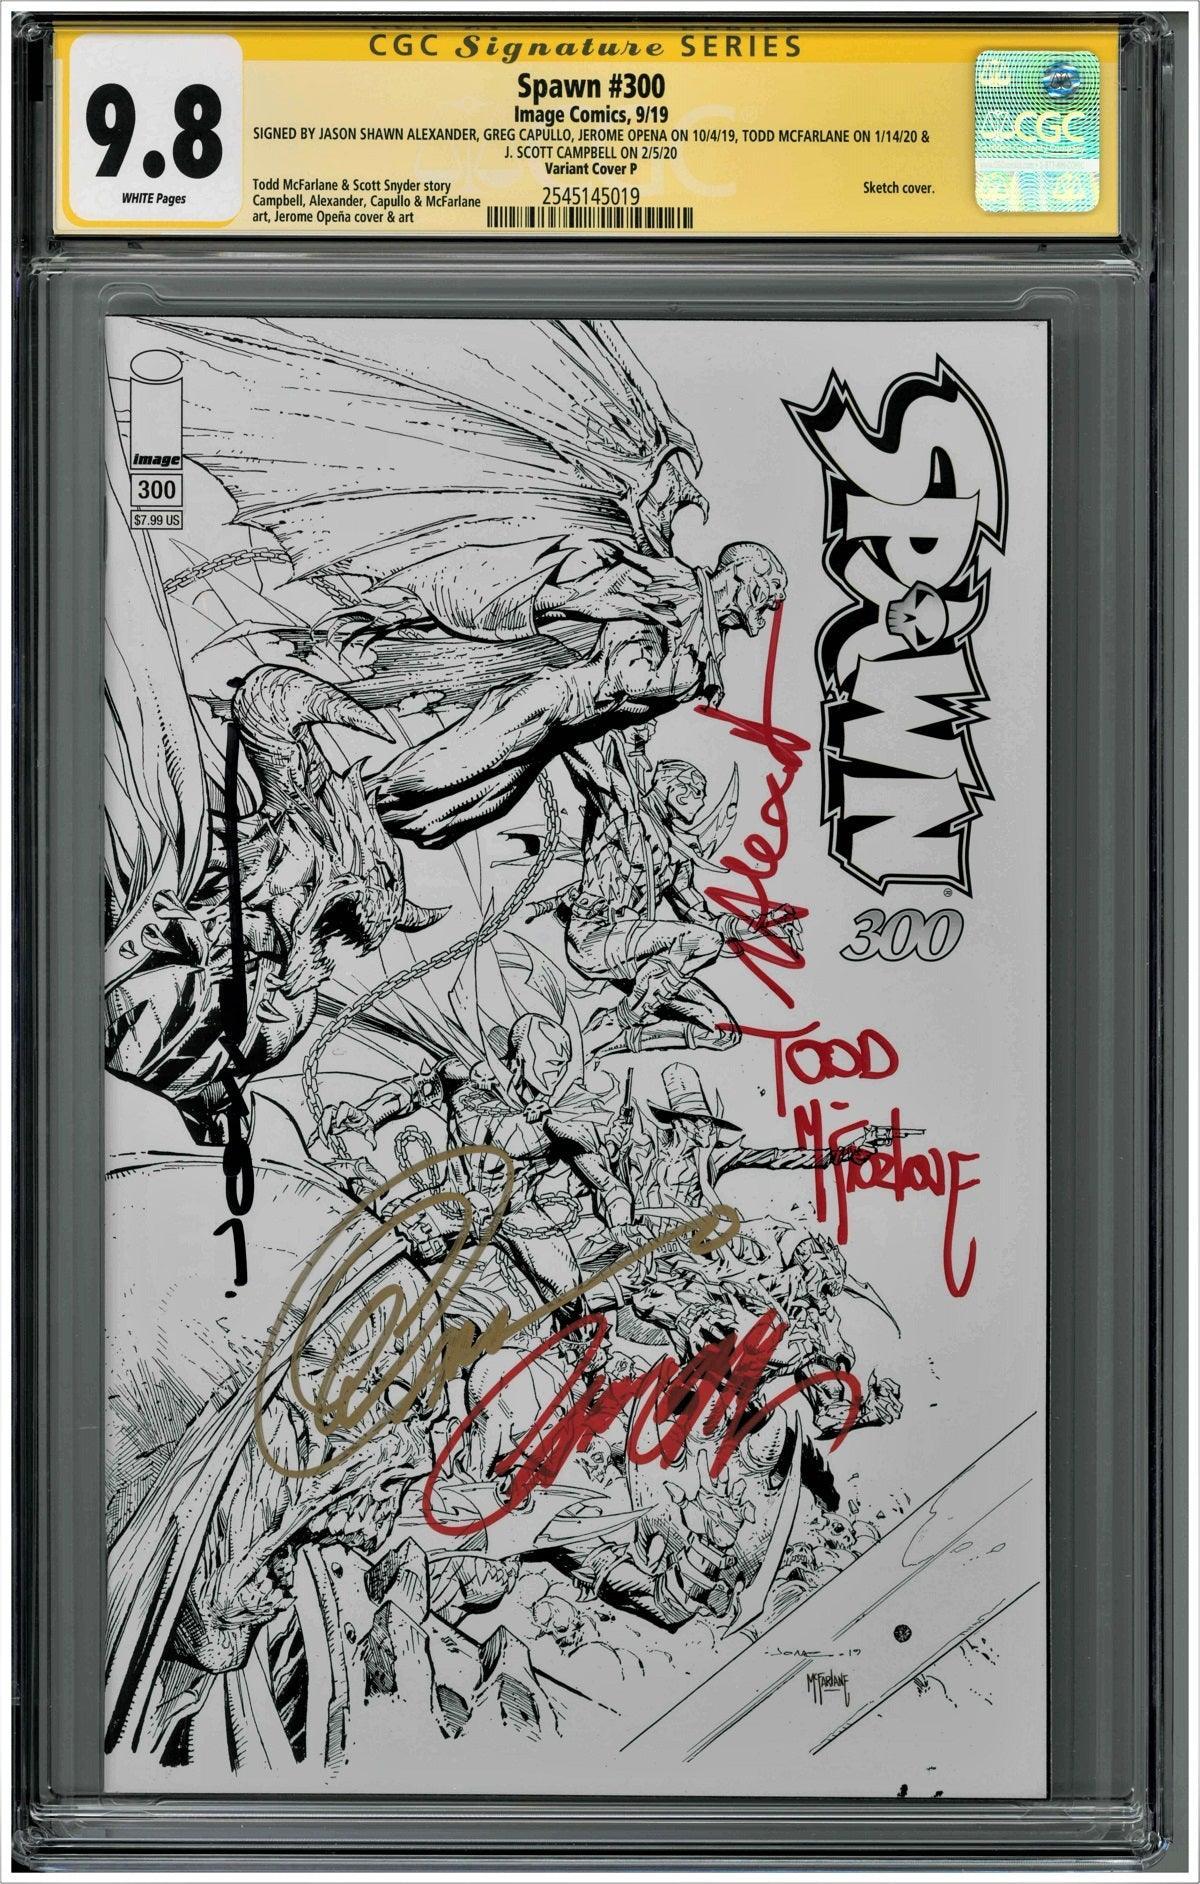 CGC SPAWN #300 VARIANT COVER P (9.8) SS - SIGNED BY MCFARLANE, CAMPBELL, CAPULLO, ALEXANDER & OPENA - Kings Comics